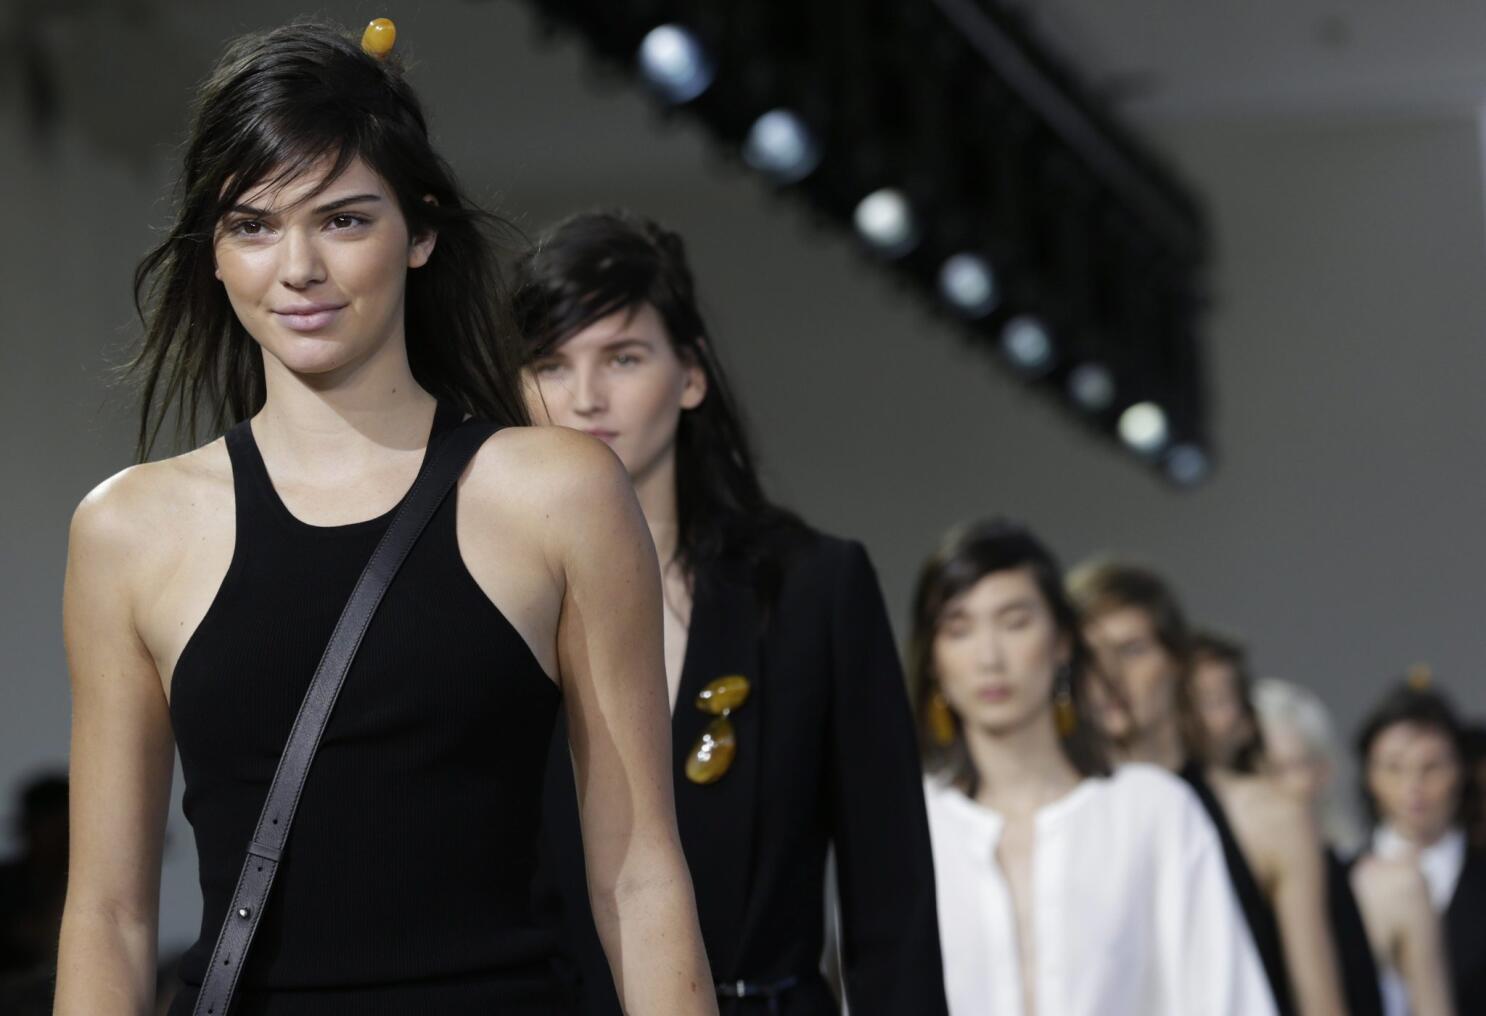 DKNY Spring 2016 Ready-to-Wear Collection